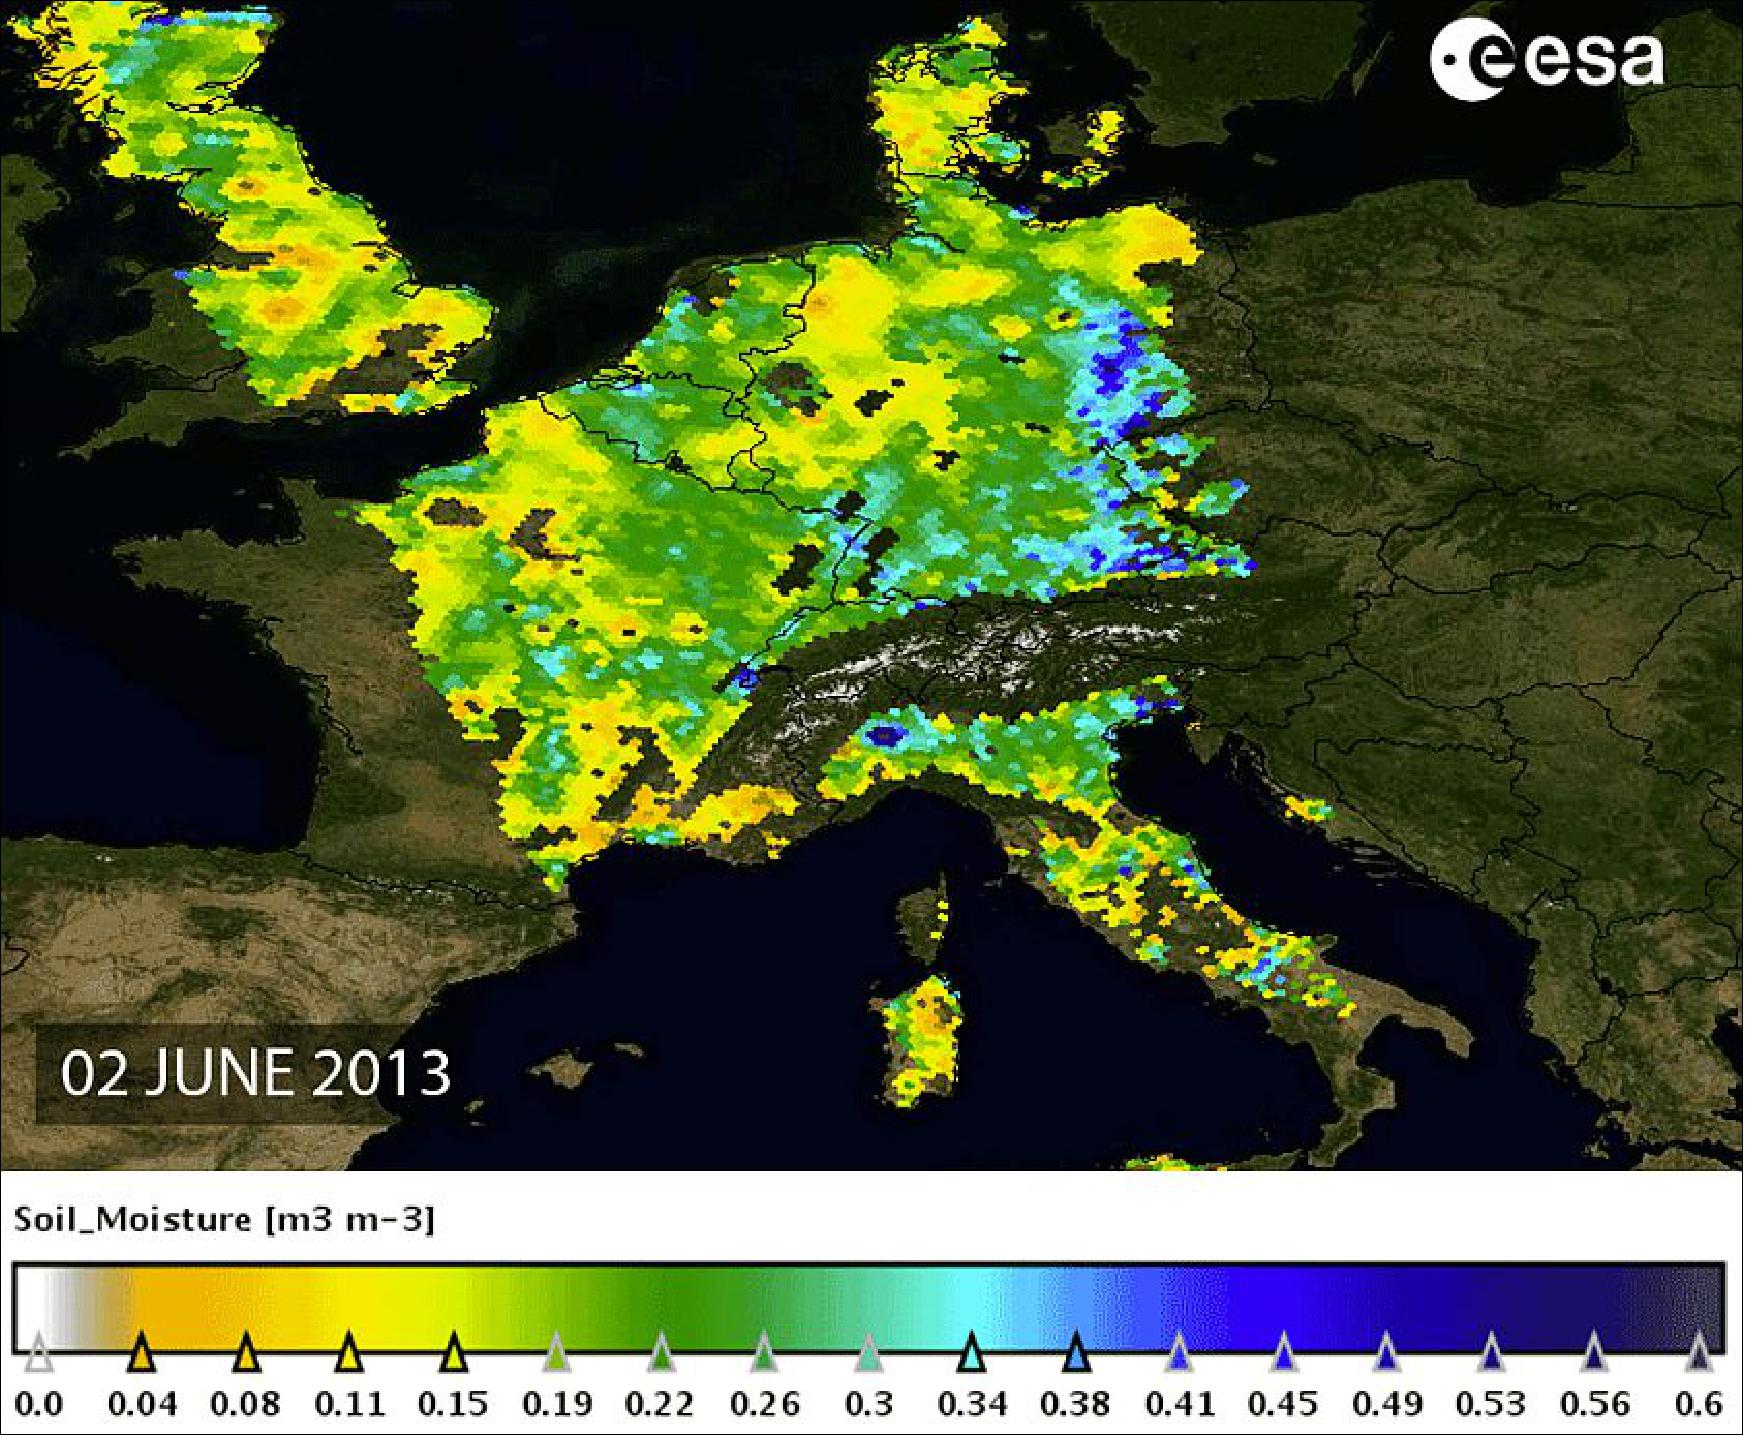 Figure 67: SMOS soil surface layer moisture map of June 2, 2013 (image credit: ESA)